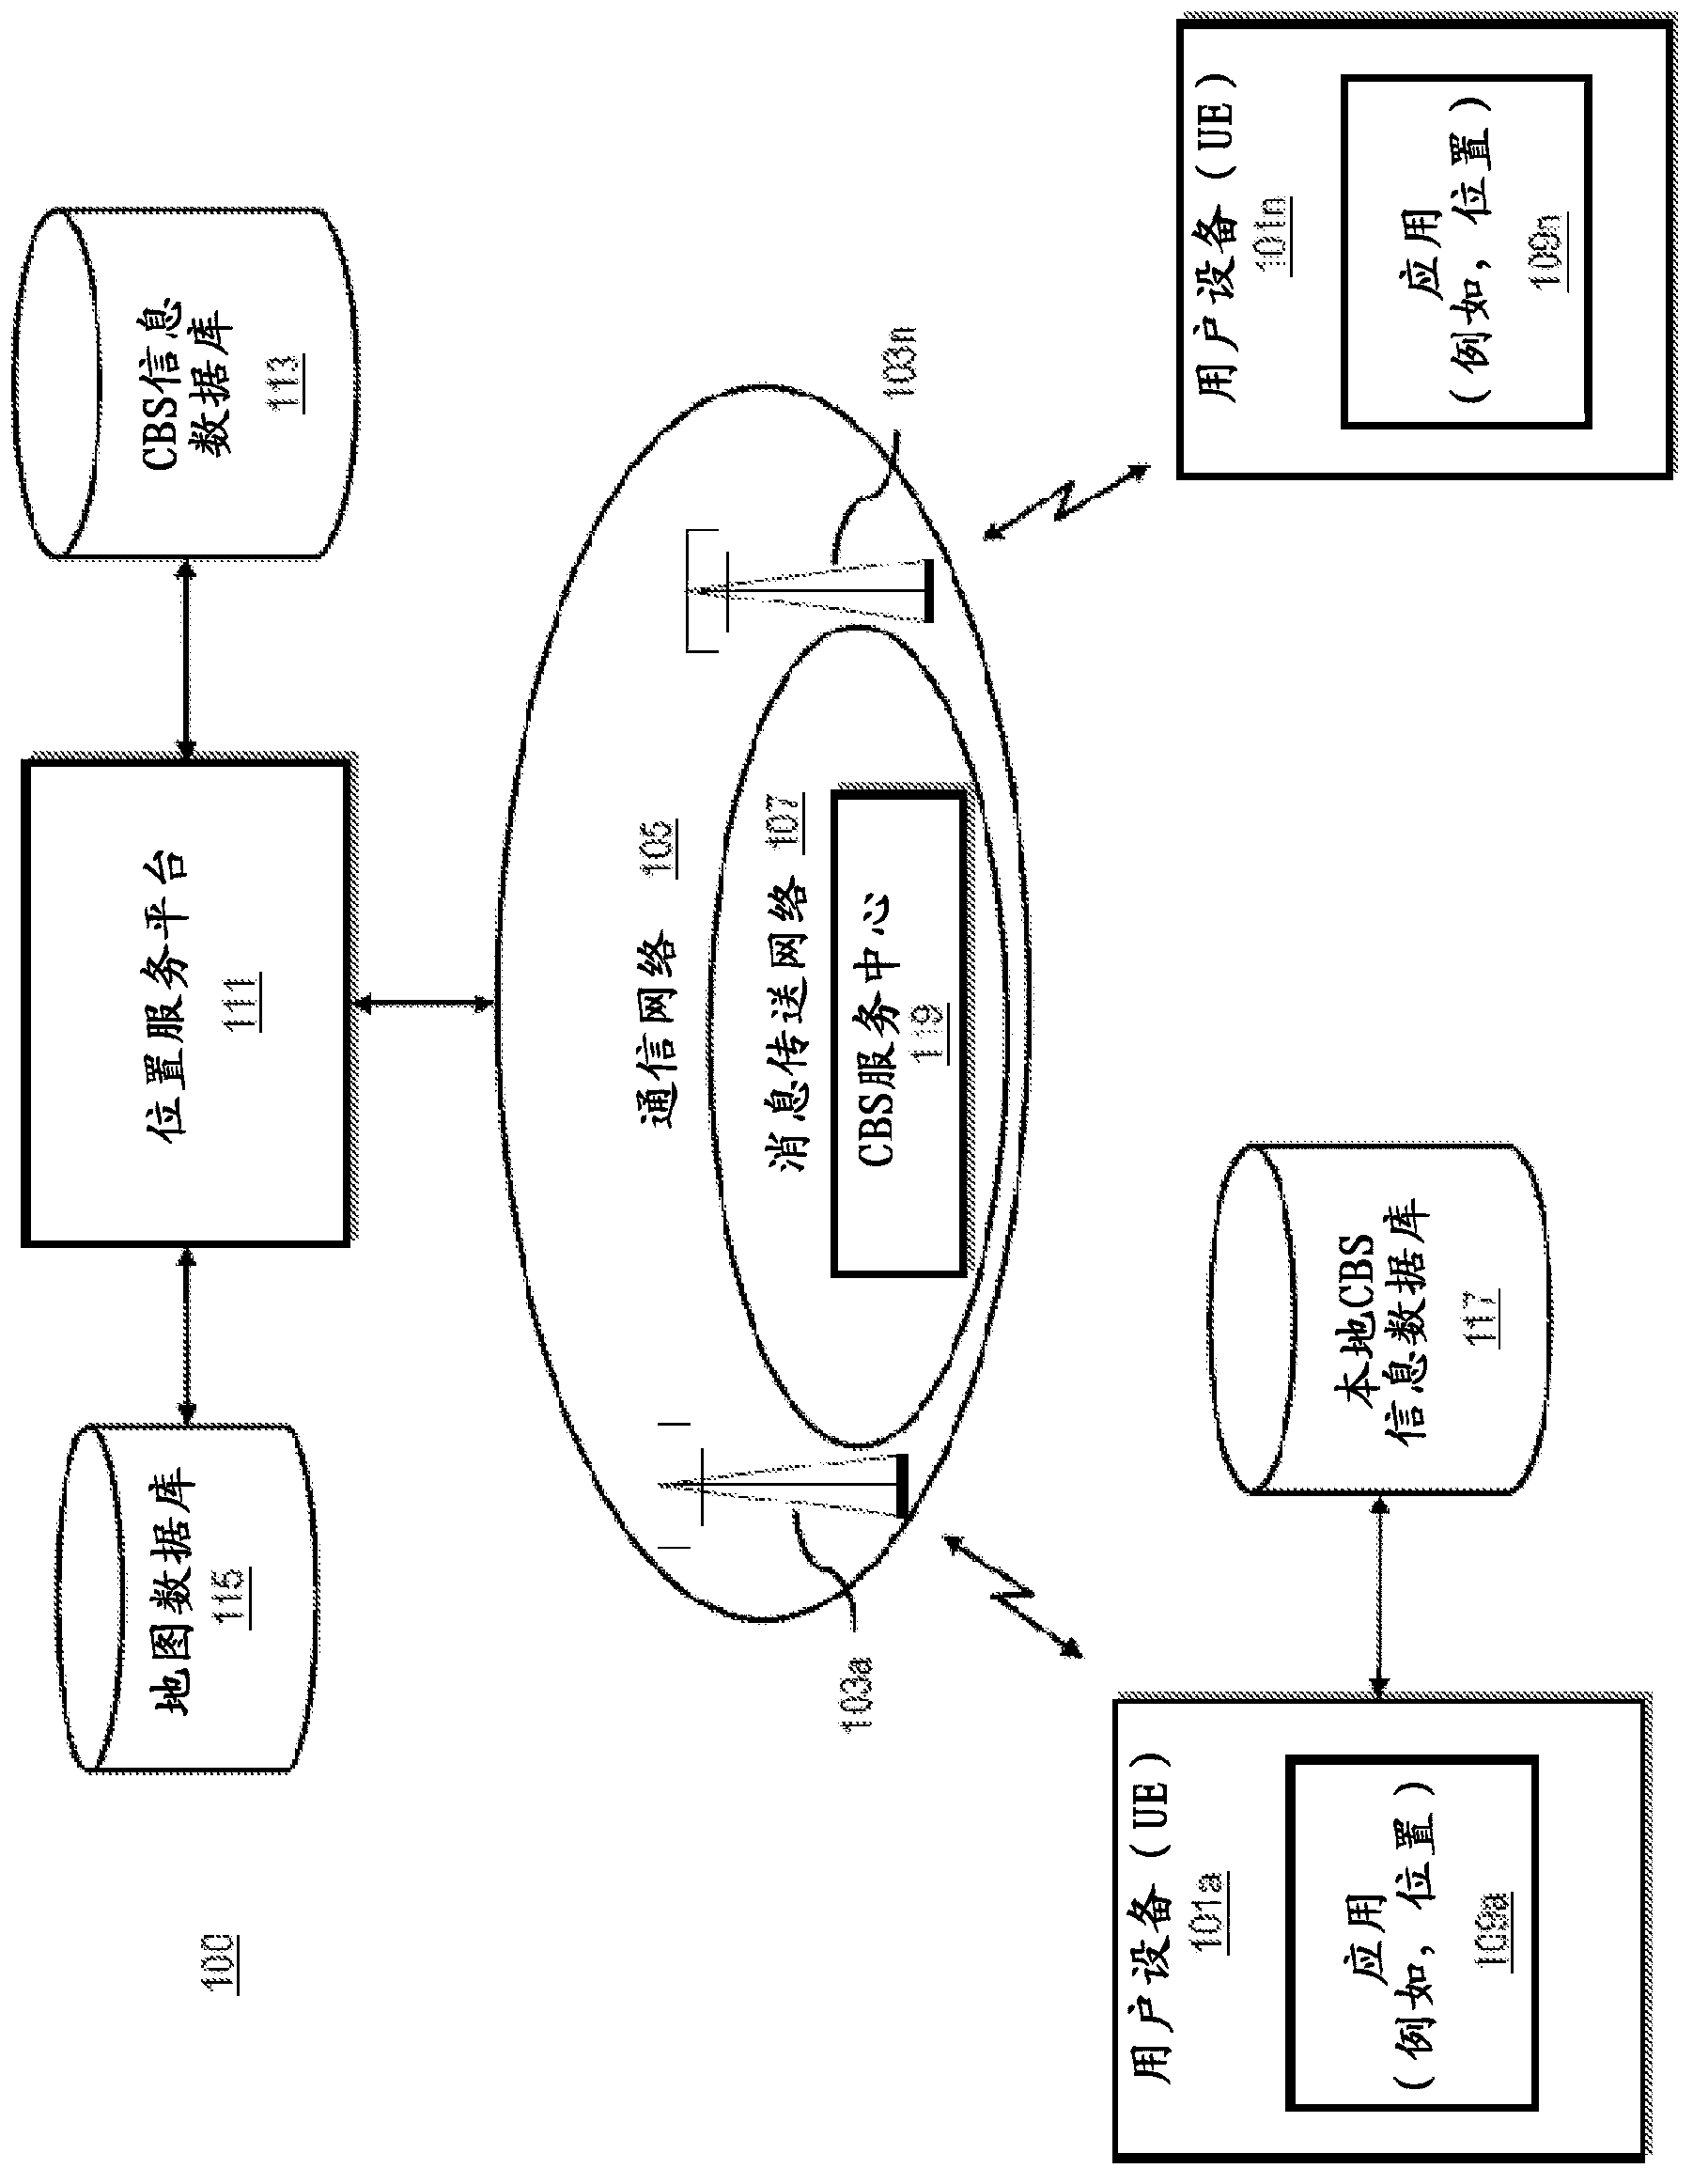 Method and apparatus for grouping points-of-interest according to area names